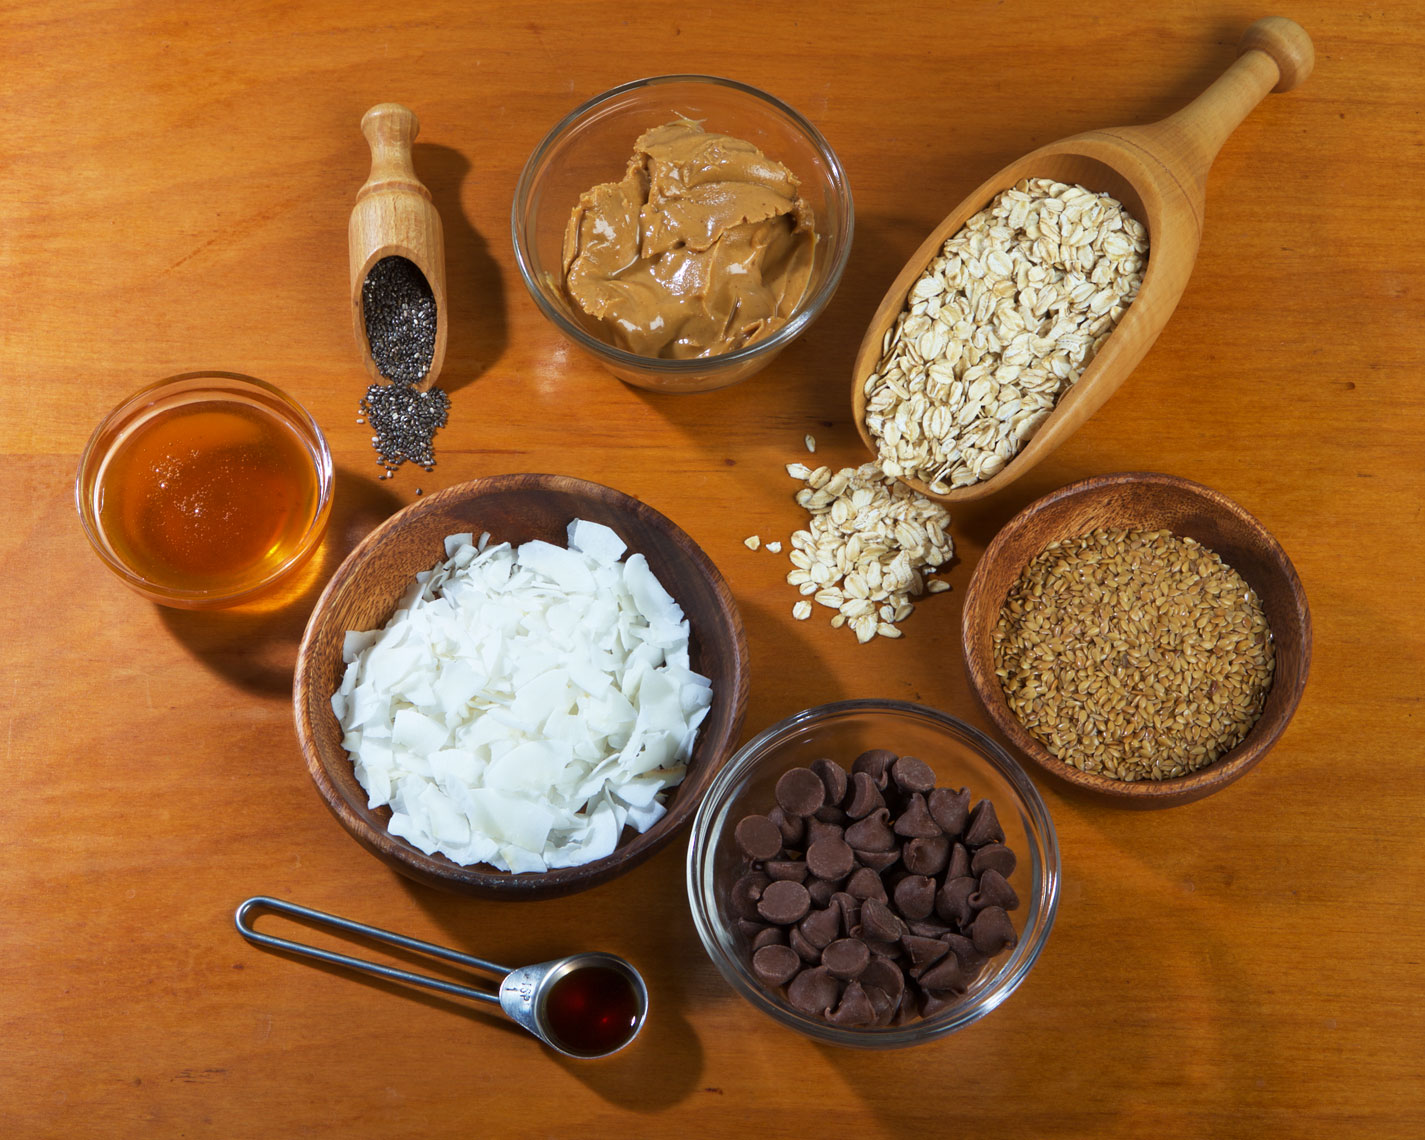 Studio Photography of Ingredients for Baking Recipe.